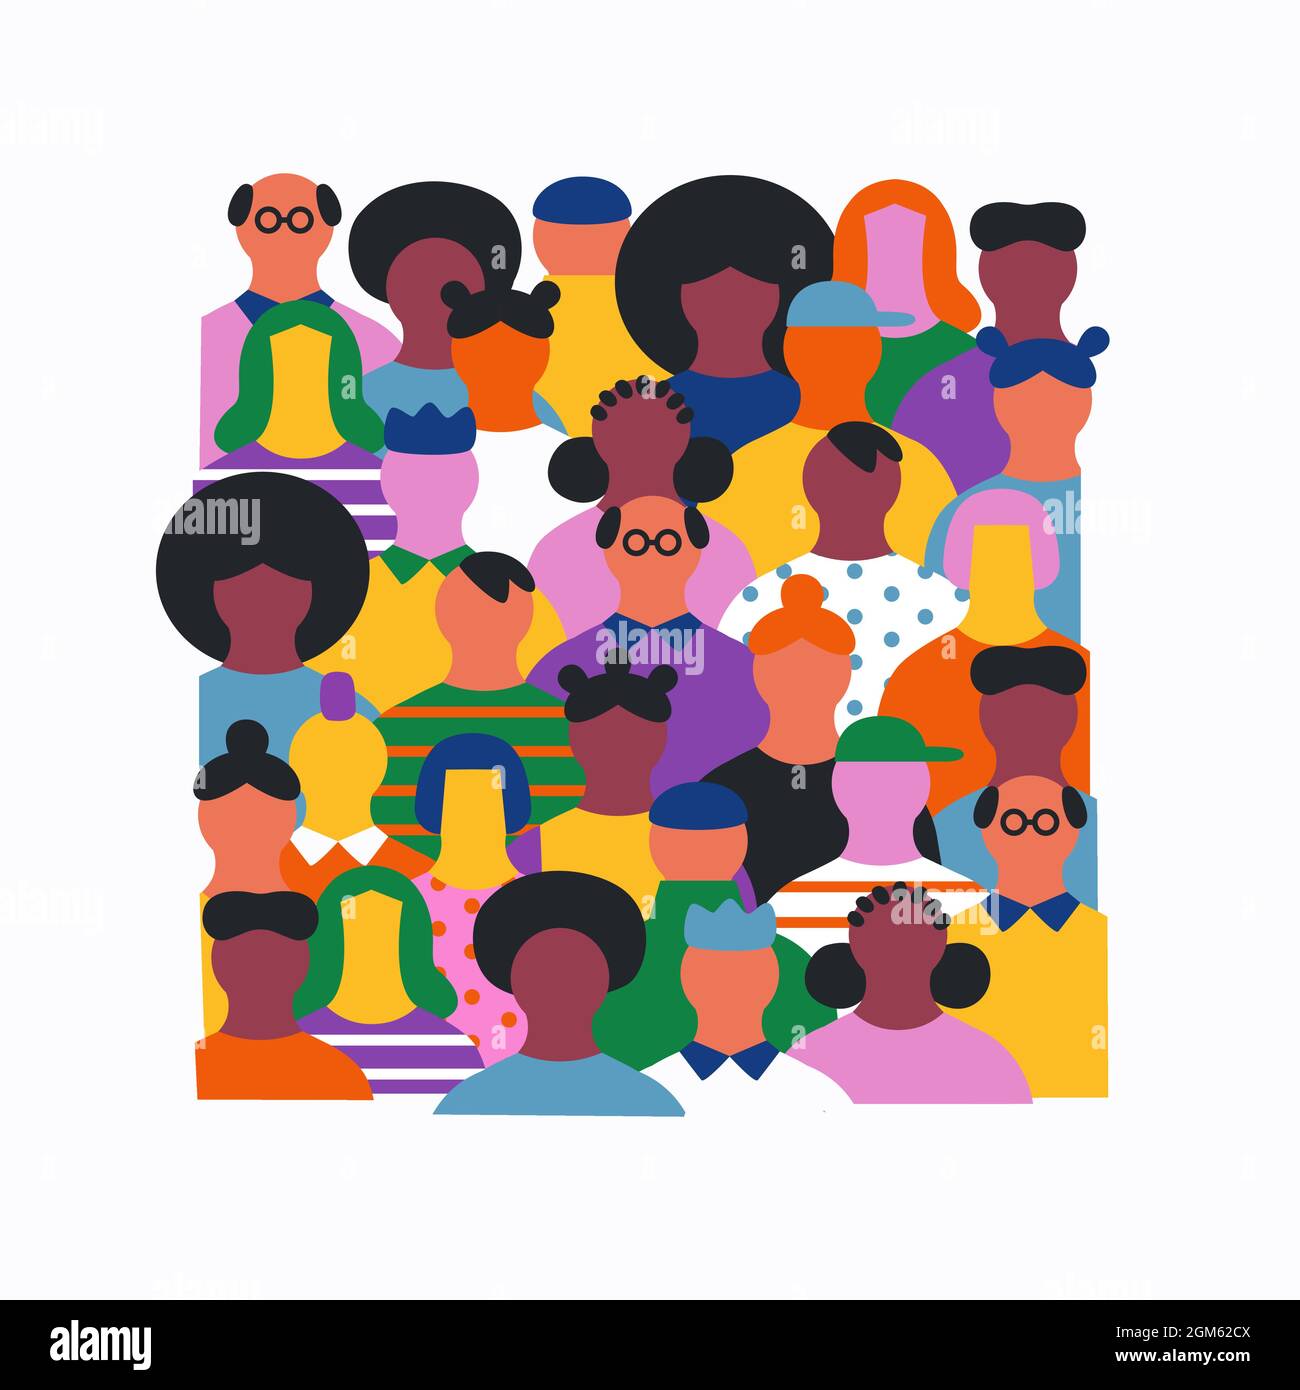 Big group of people faces together making square box shape. Colorful diverse friend team concept, united community or social cooperation cartoon on is Stock Vector